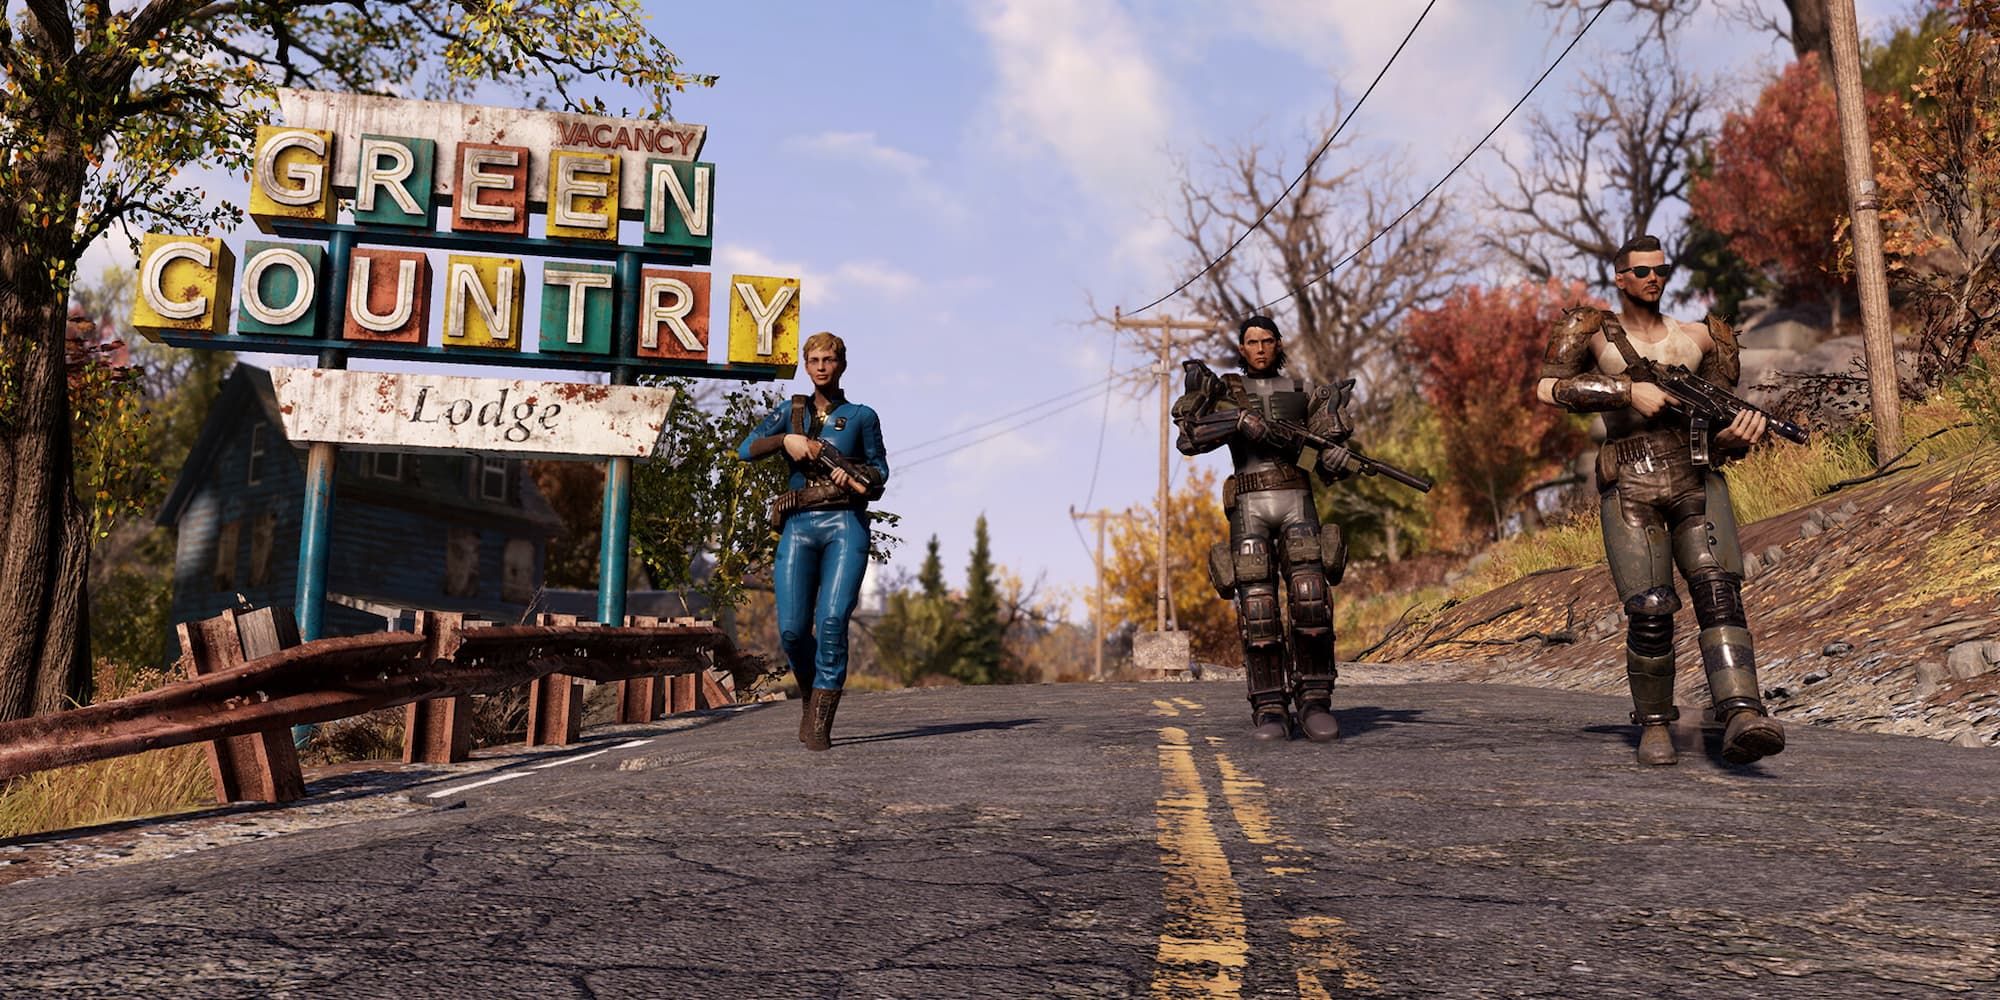 Green Country Lodge signage Fallout 76